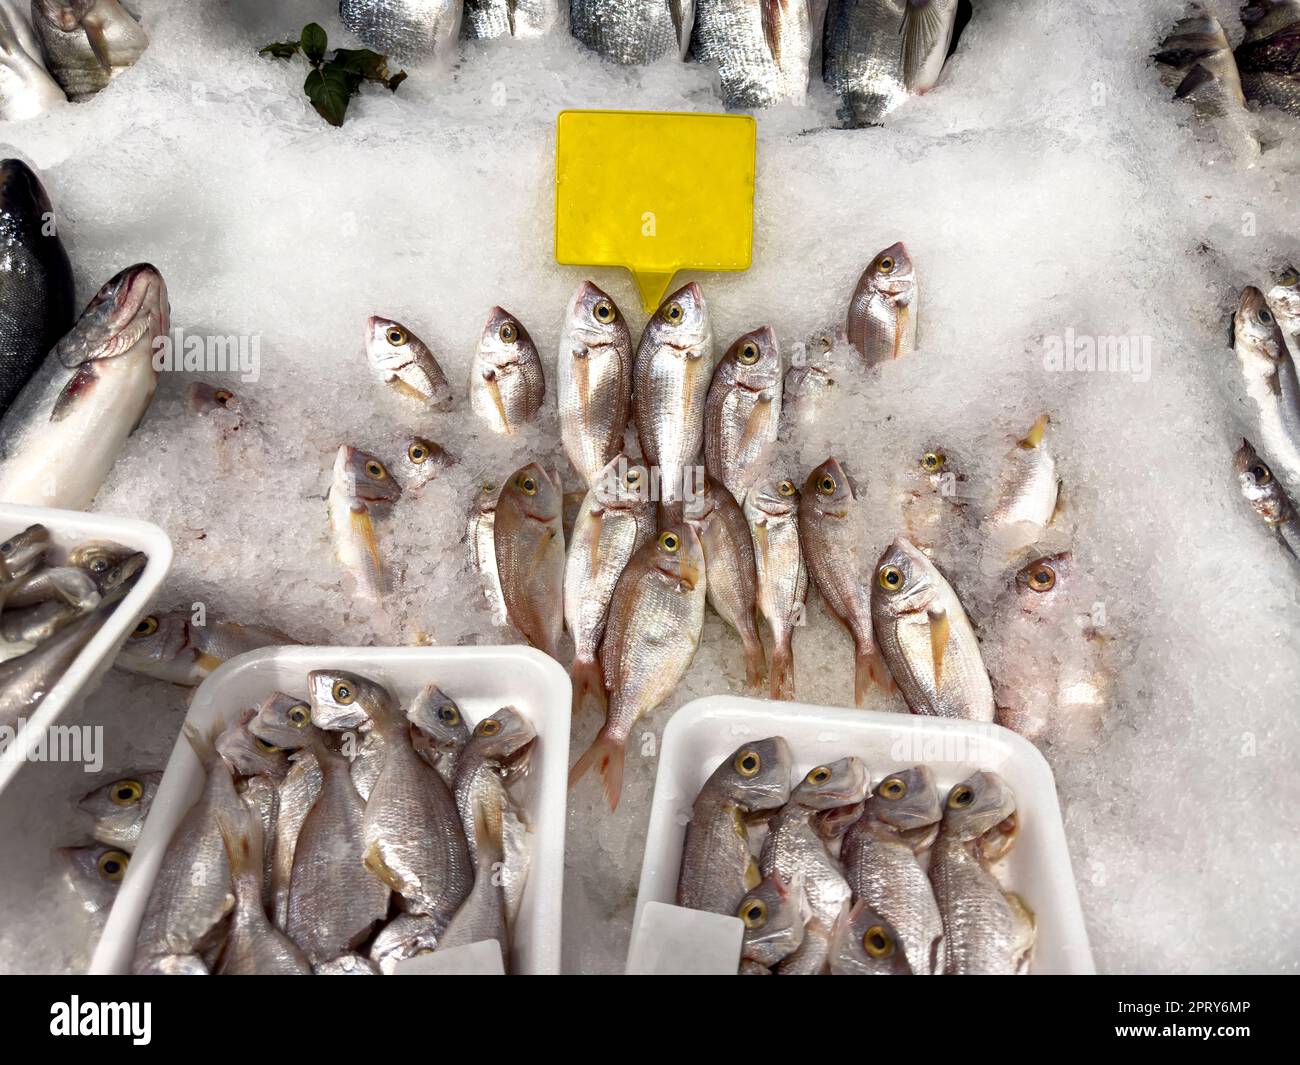 Red porgy fish. Fresh pagrus pagrus or red porgy fish in ice Stock Photo